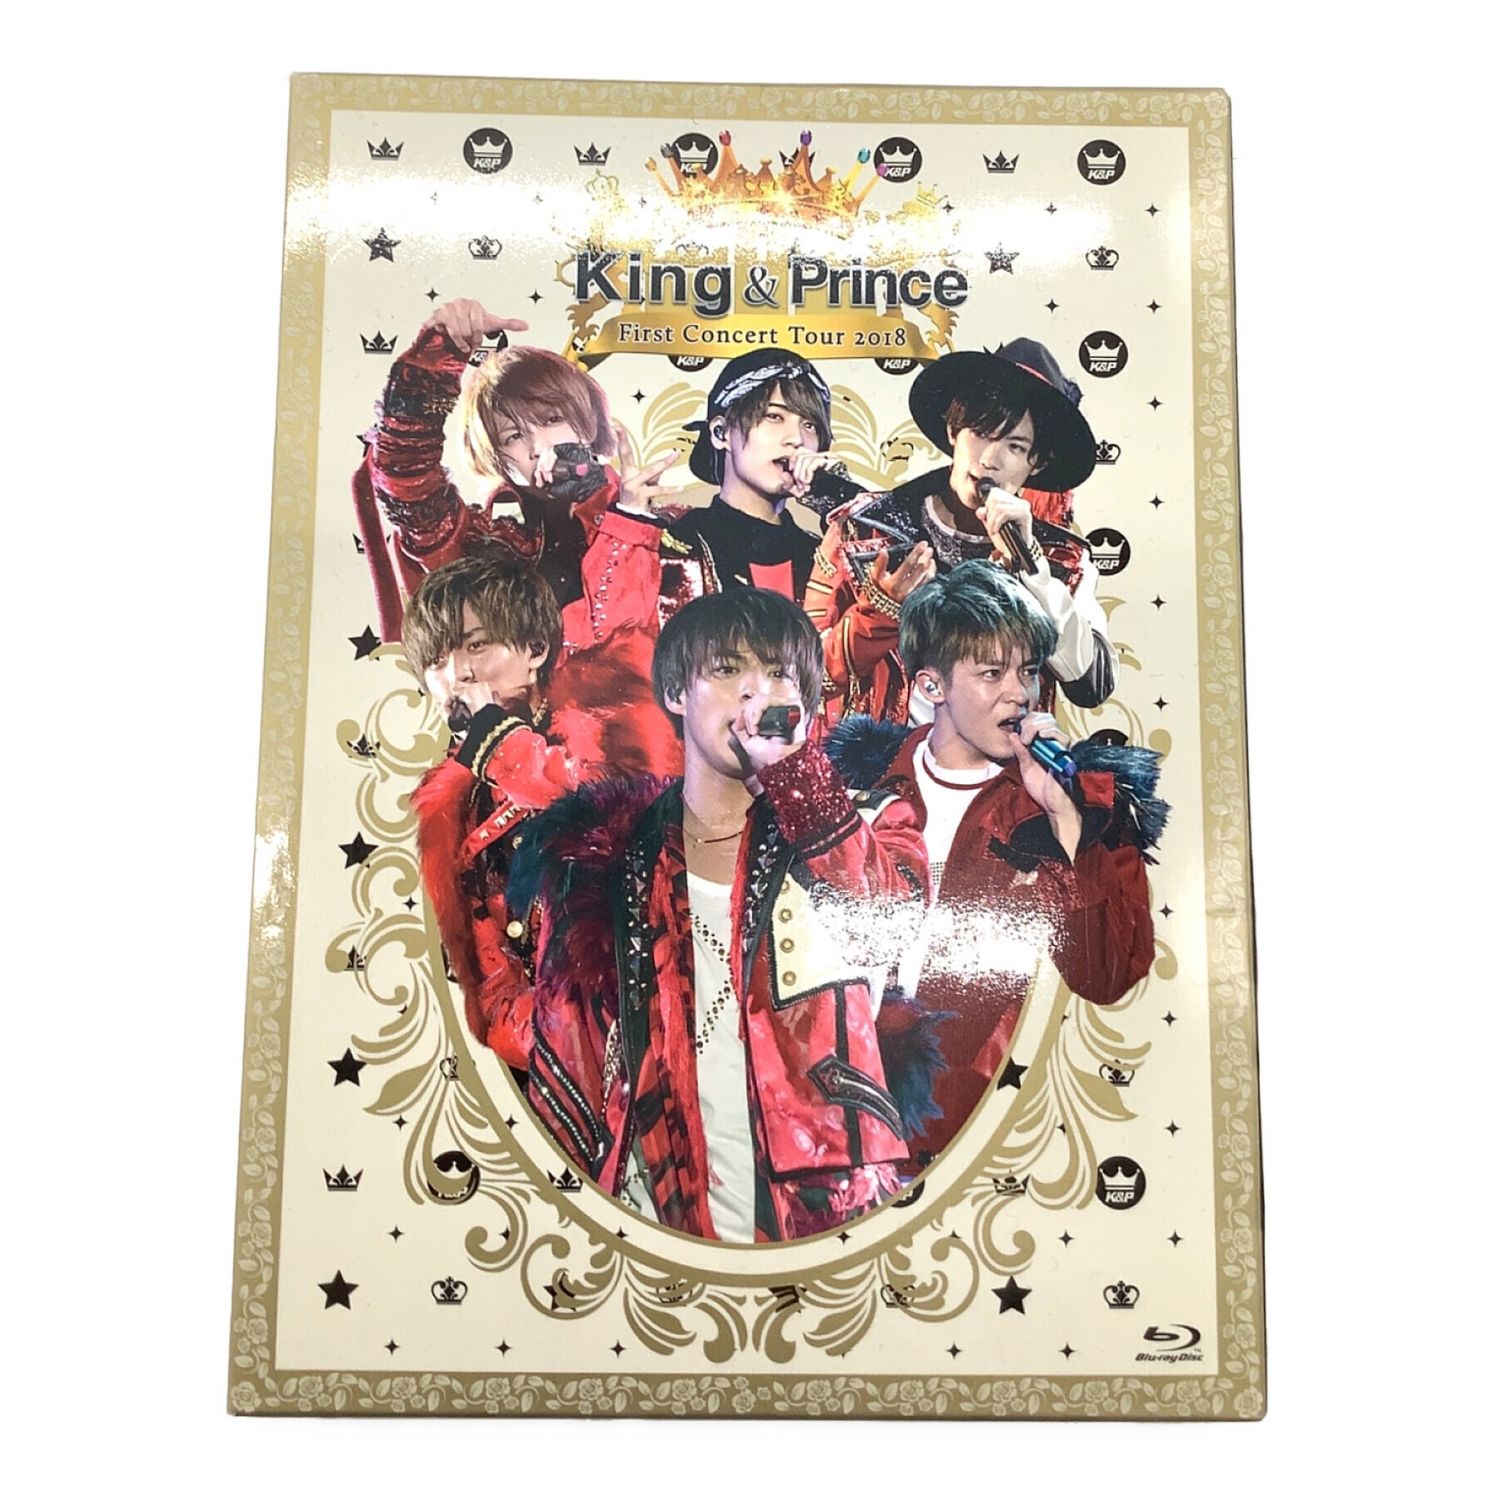 King u0026Prince 2018 First concert 初回限定盤 - ミュージック